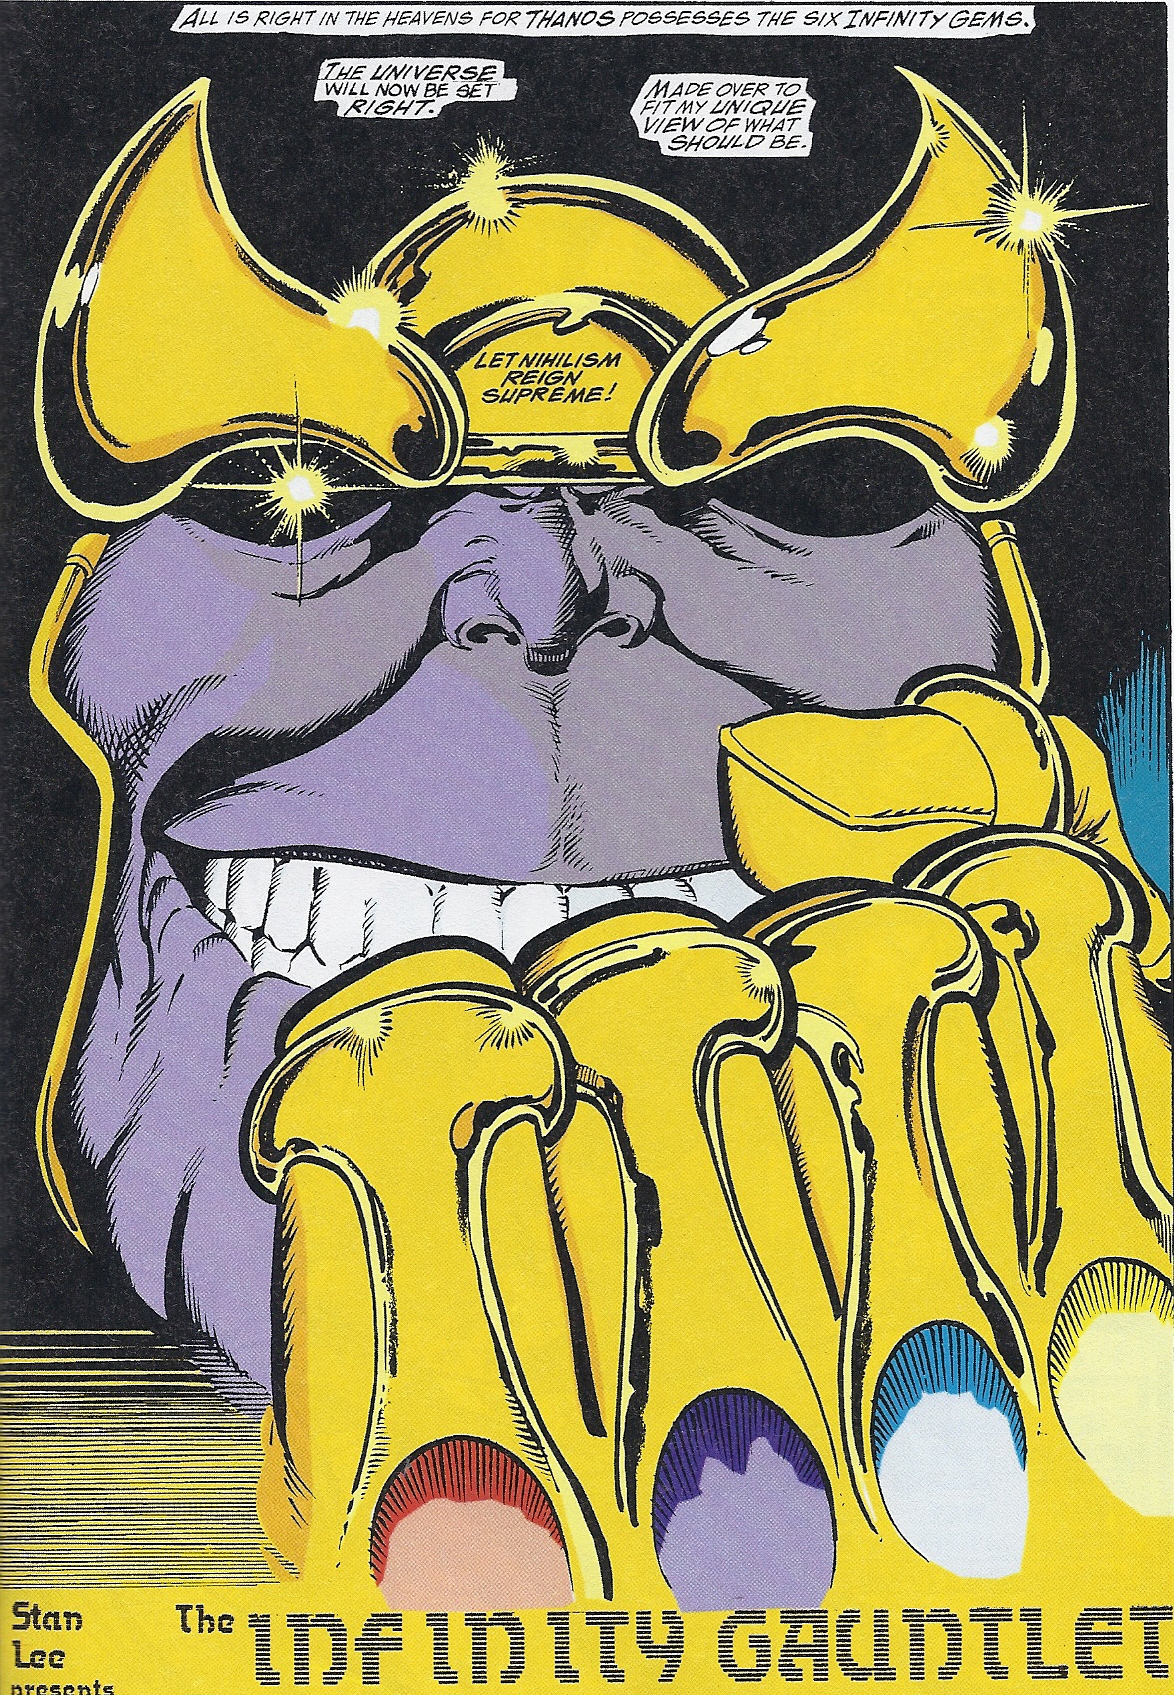 If you keep watching after the credits of the Avengers, you will see this face, Thanos the Mad Titan